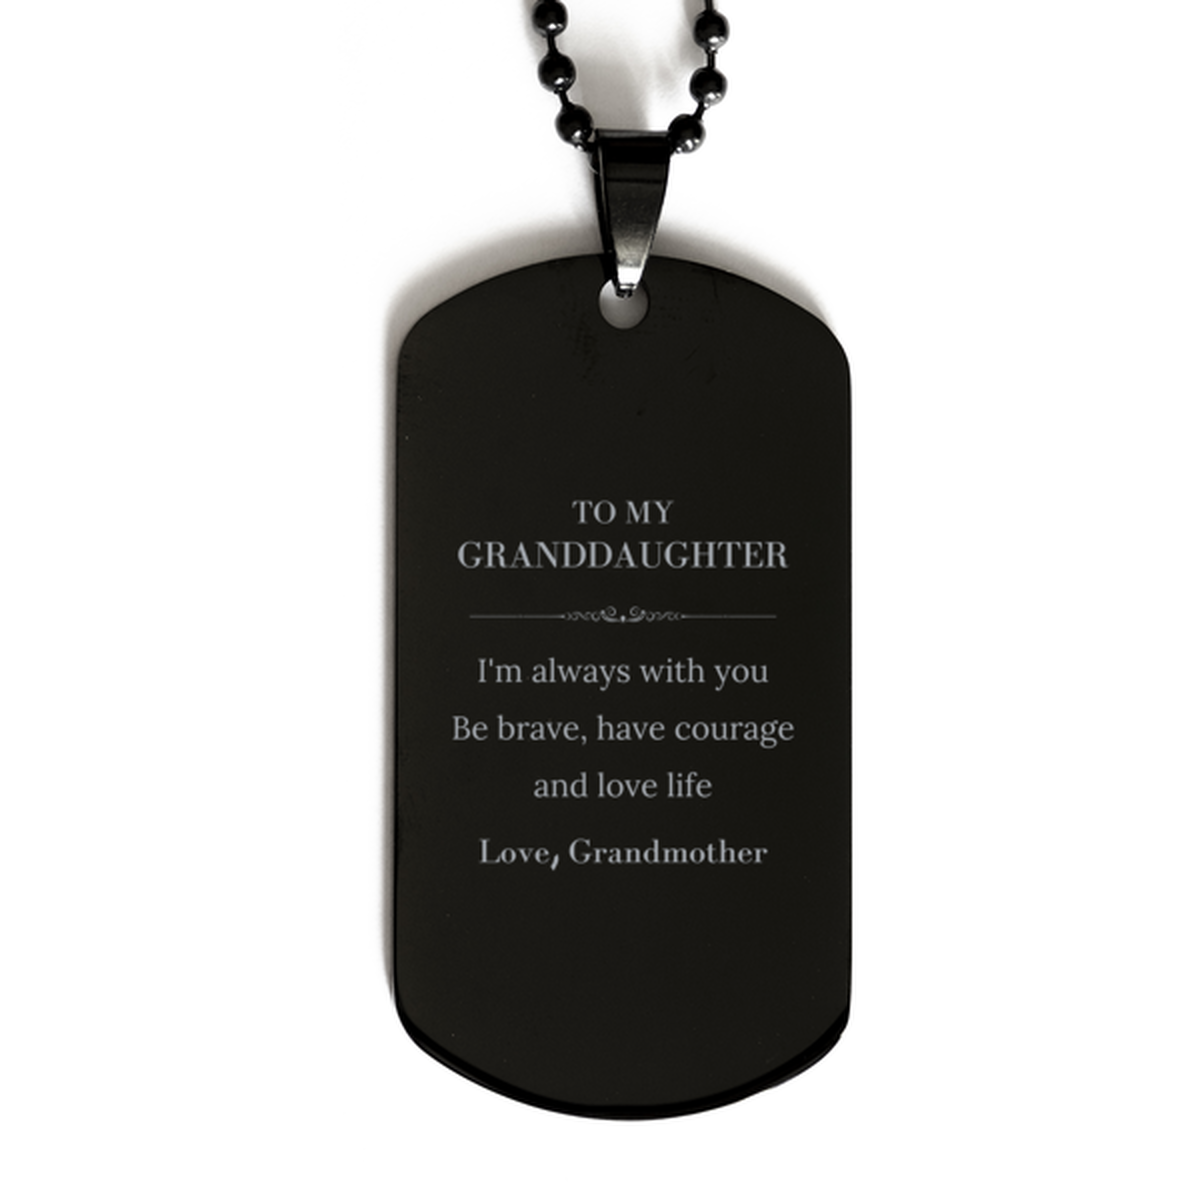 To My Granddaughter Gifts from Grandmother, Unique Black Dog Tag Inspirational Christmas Birthday Graduation Gifts for Granddaughter I'm always with you. Be brave, have courage and love life. Love, Grandmother